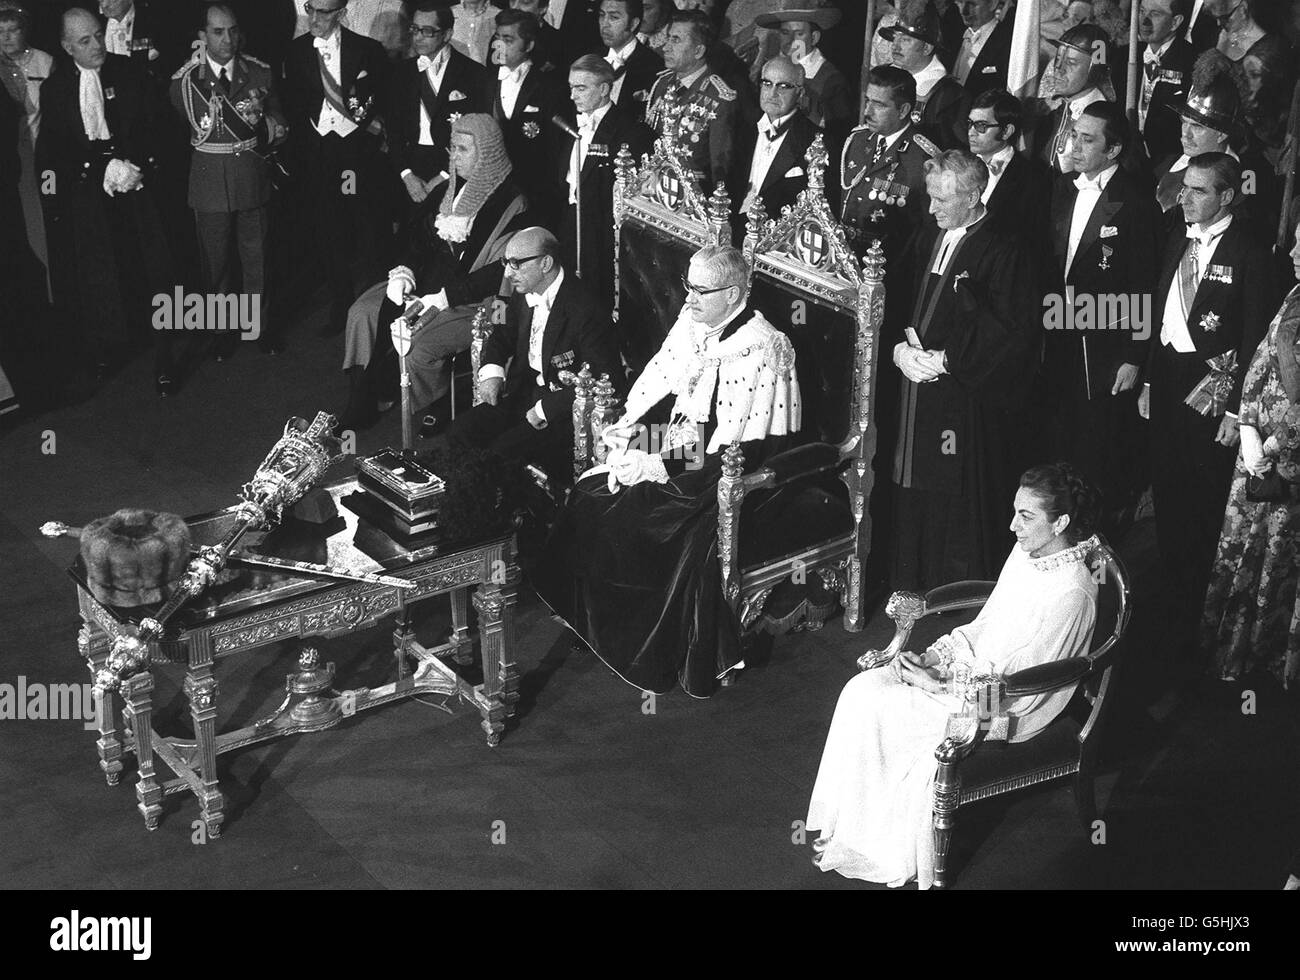 Seated in front of the standing guests are (from left) the town clerk, the King of Afghanistan, the Lord Mayor (Sir Edward Howard) and Princess Bilquis. The Lord Mayor welcomed the King and Princess to a reception and banquet at the City Hall. * .... Princess Alexandra and Mr Angus Ogidvy were among those present. Stock Photo